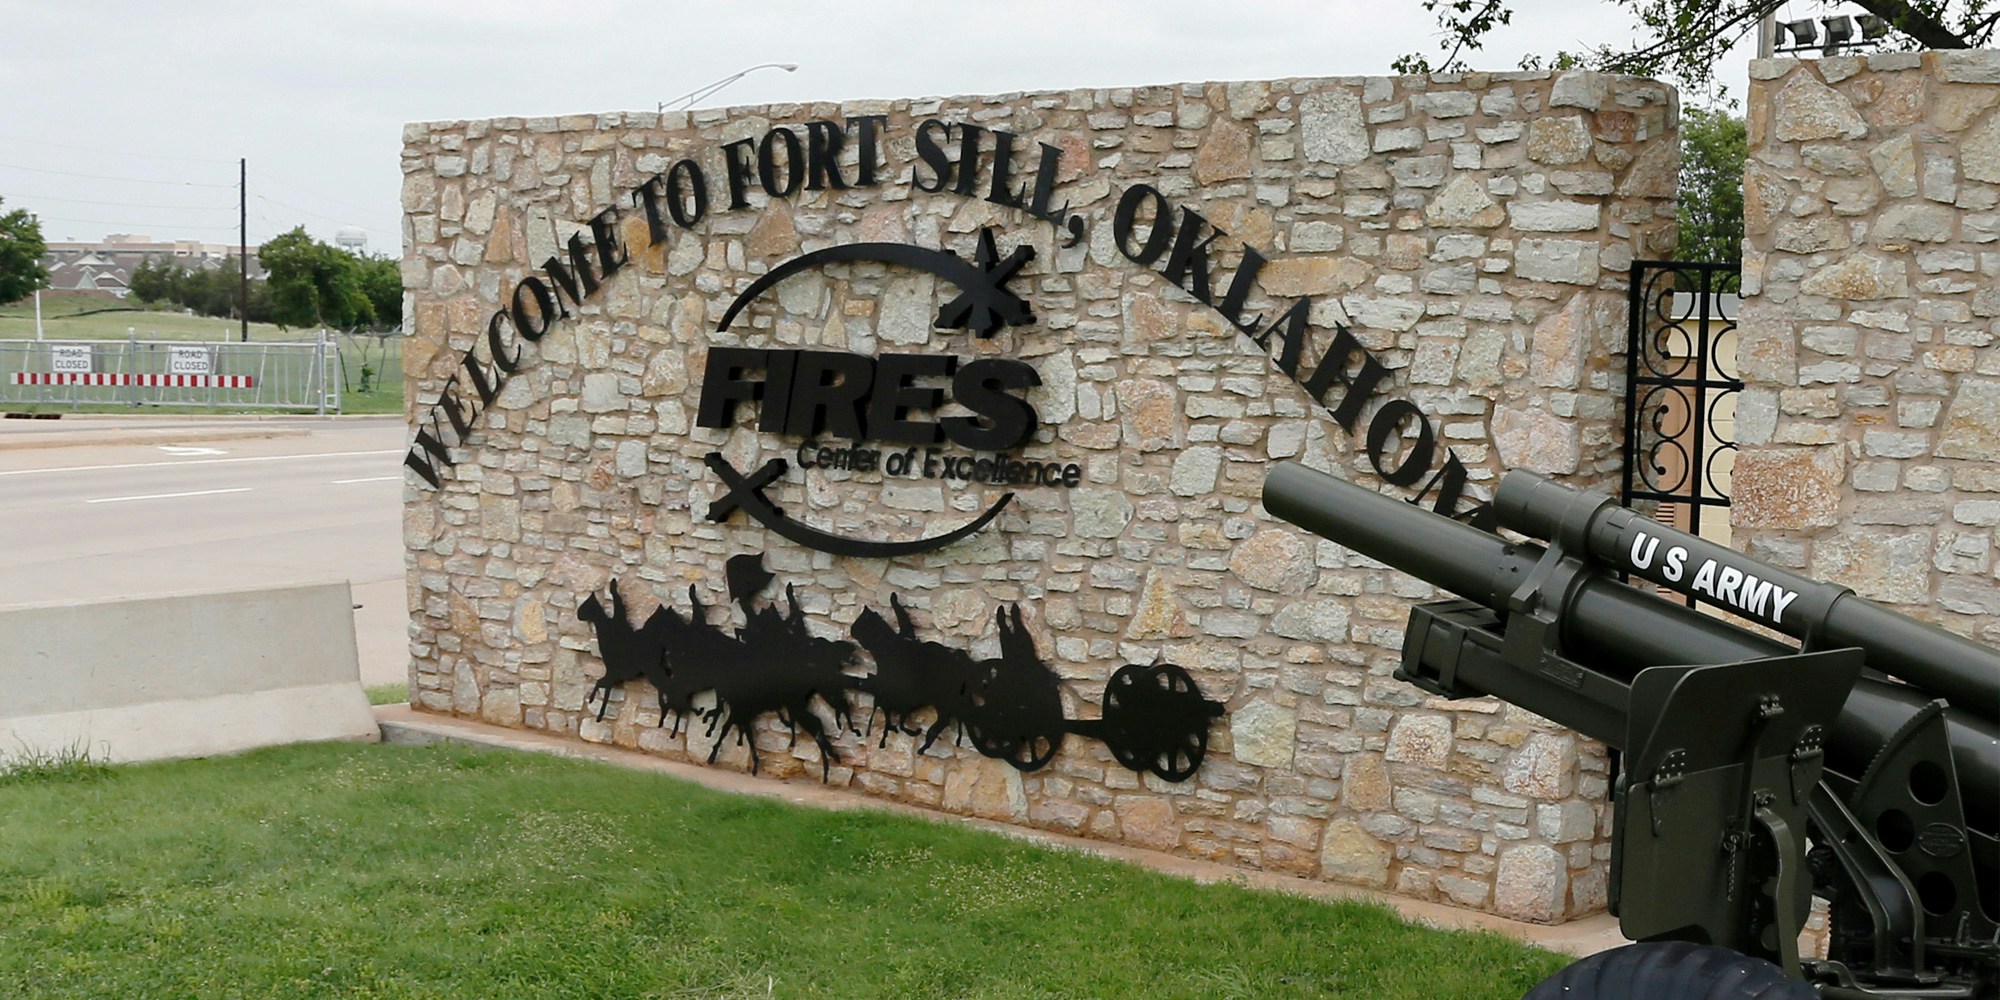 #71 - Main news thread - conflicts, terrorism, crisis from around the globe - Page 5 Fort-sill-oklahoma